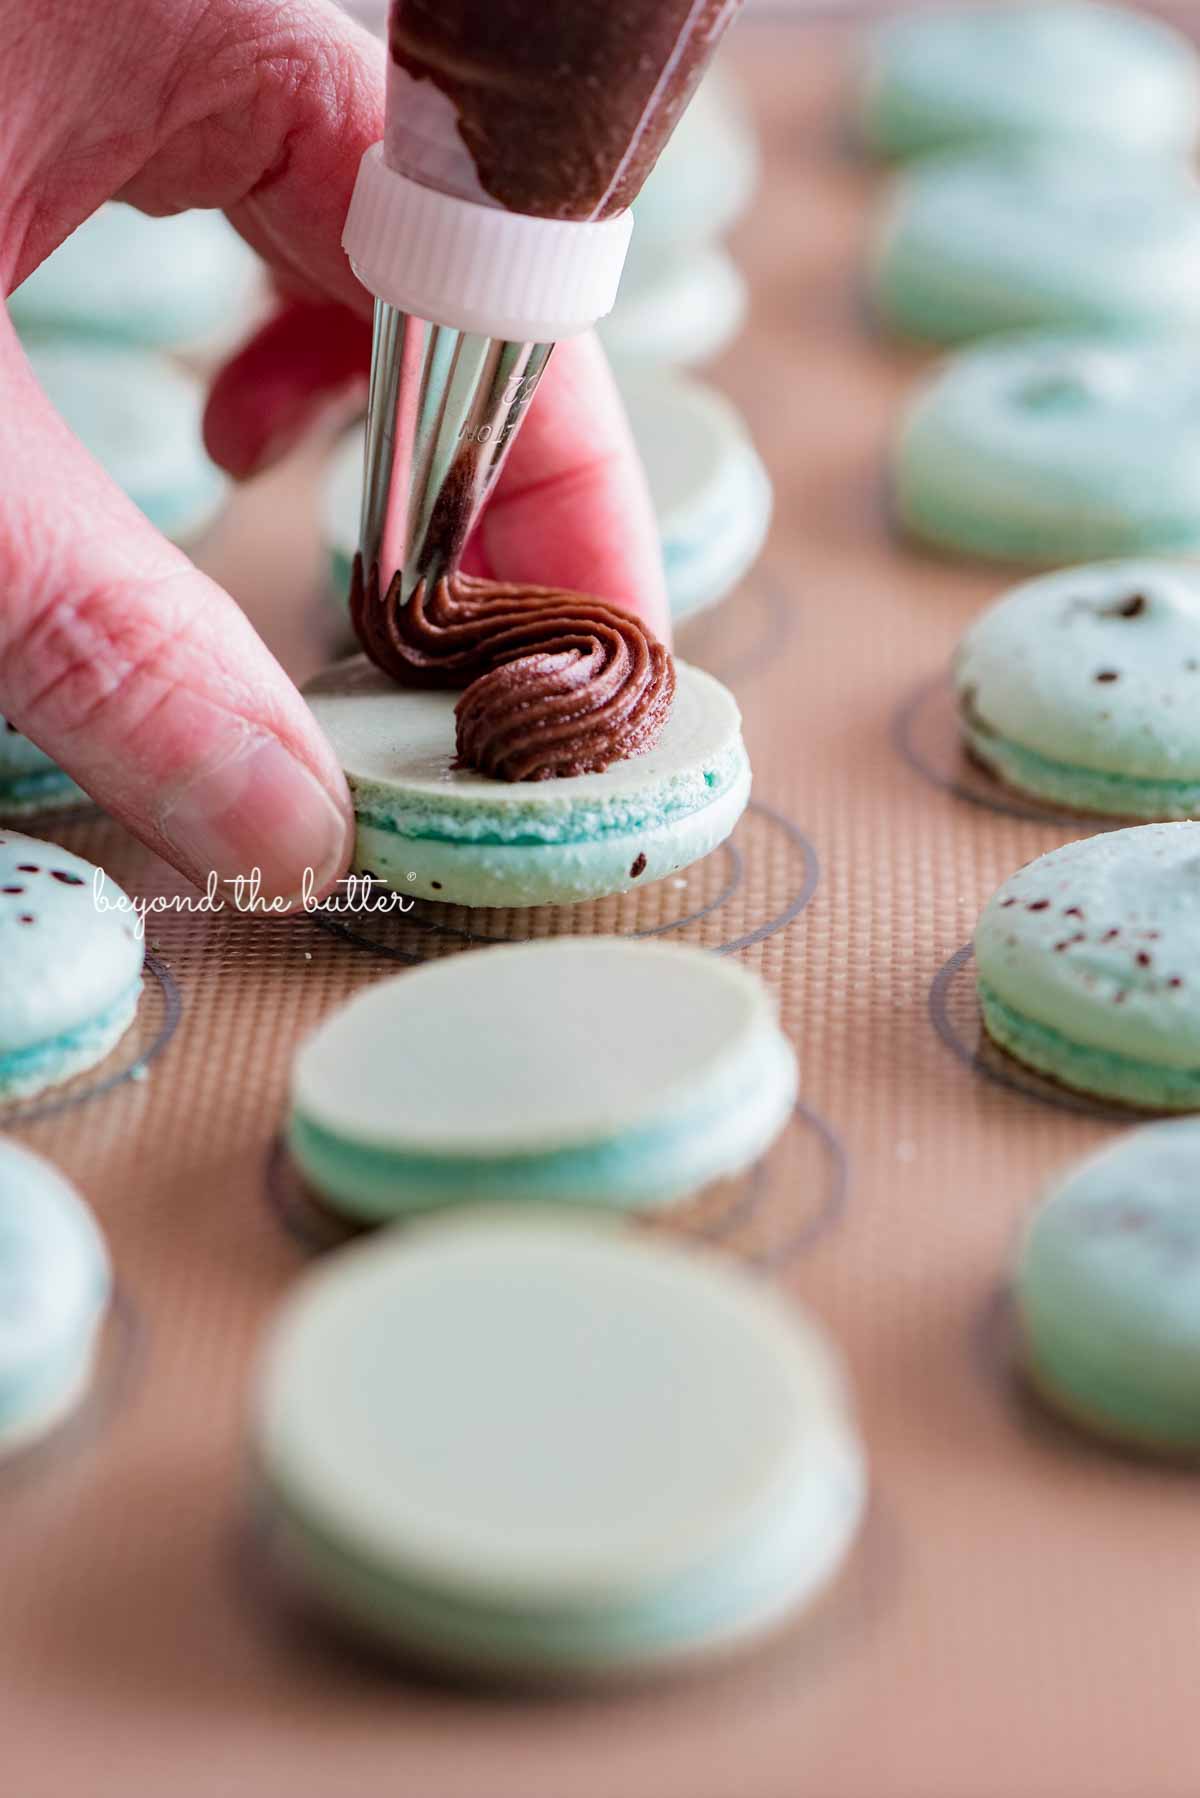 Piping milk chocolate frosting onto robin's egg macaron shells from BeyondtheButter.com | All images © Beyond the Butter®